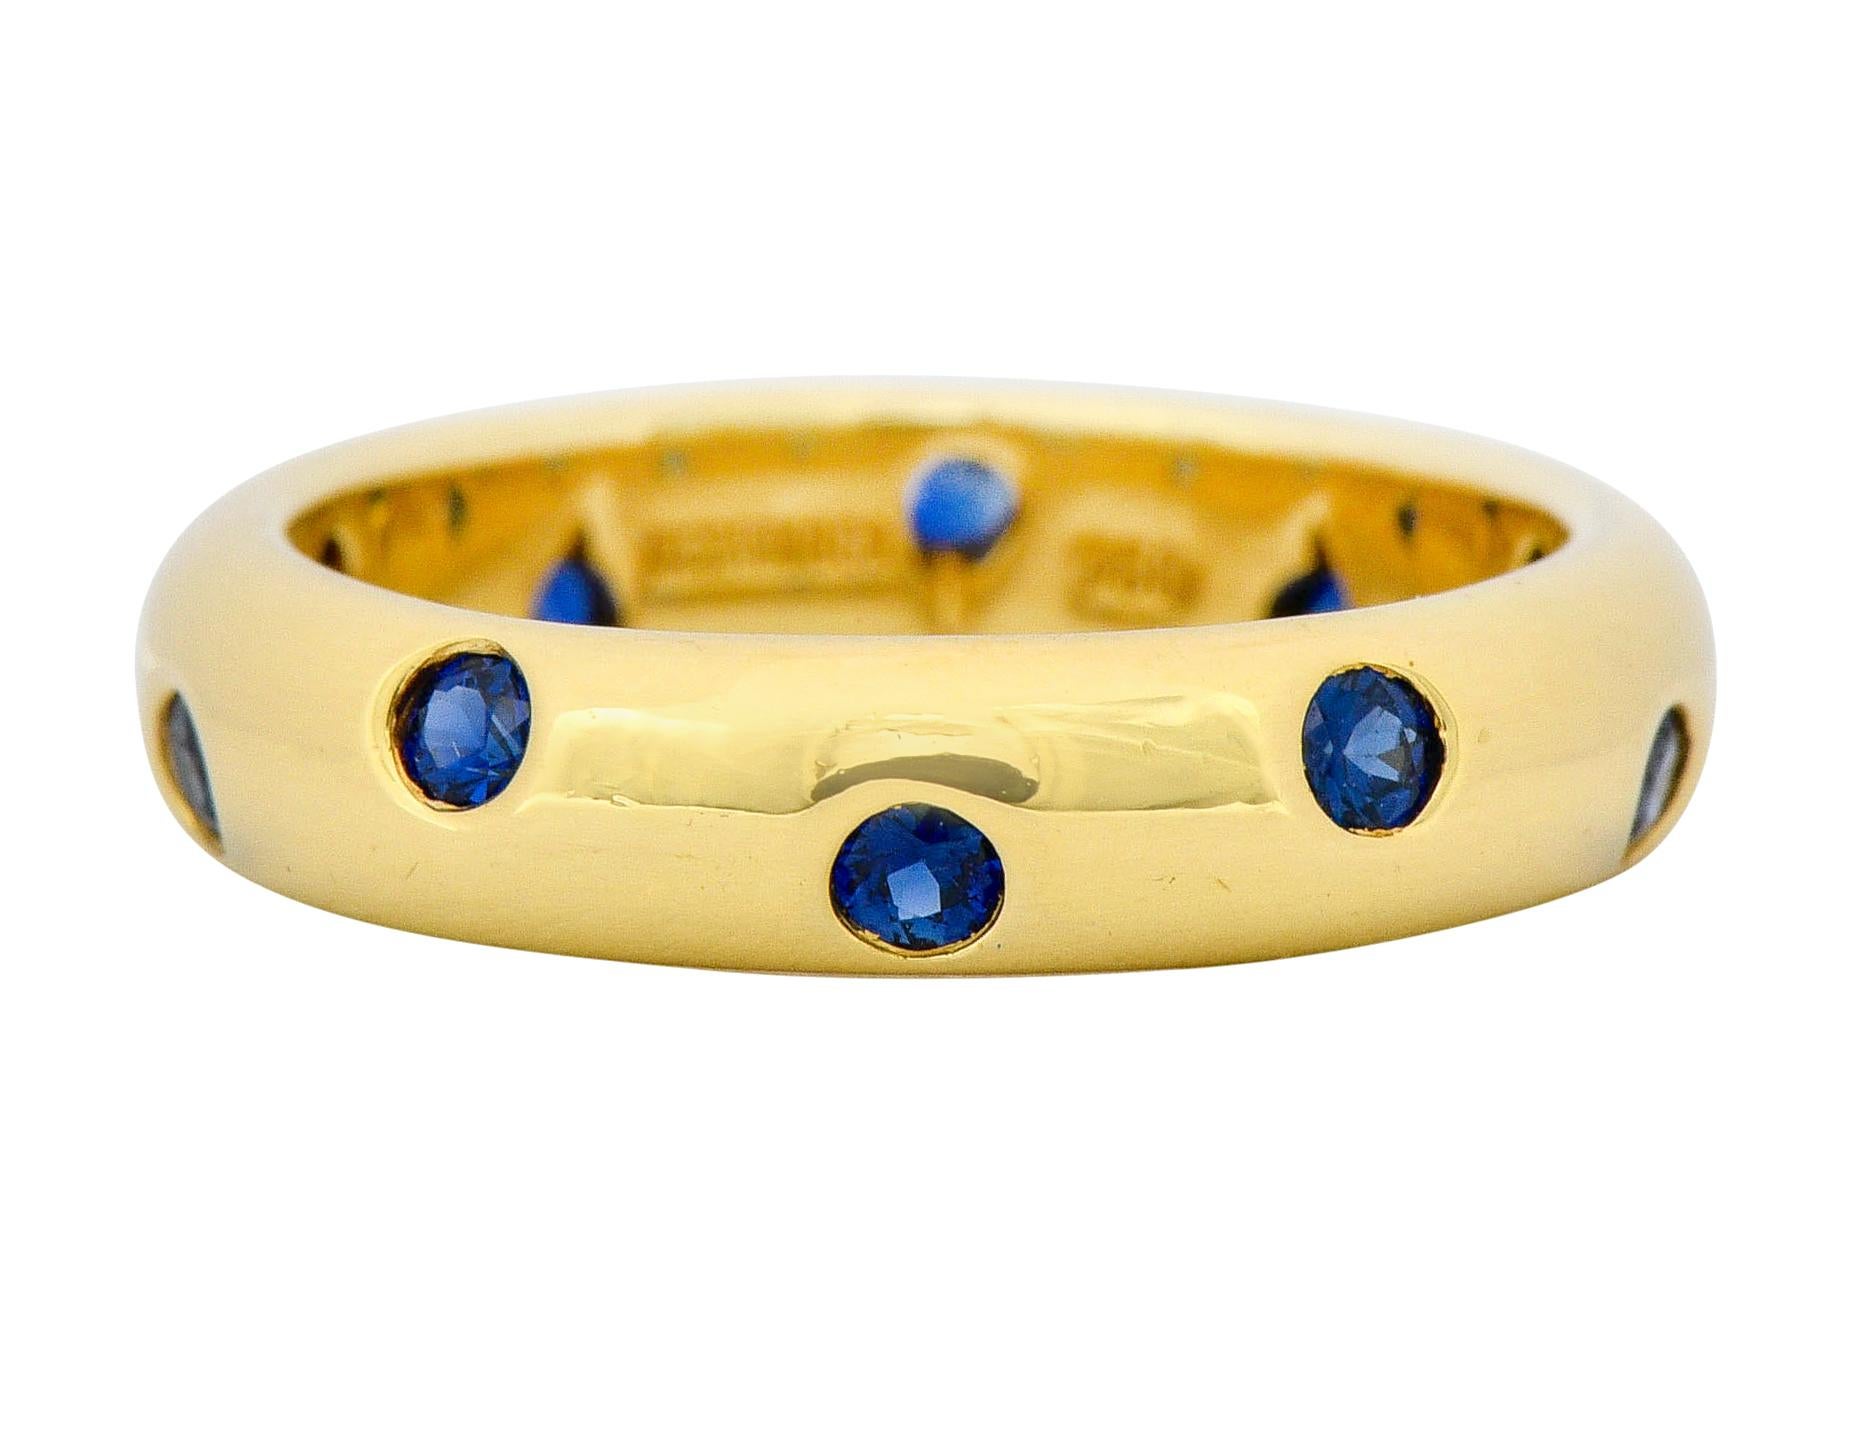 Band style ring with a high polished finish and a rounded curvature

Flush set throughout by ten round cut sapphire weighing approximately 0.40 carat total

Very well-matched with a bright medium-dark royal blue color

Fully signed Tiffany & Co. and